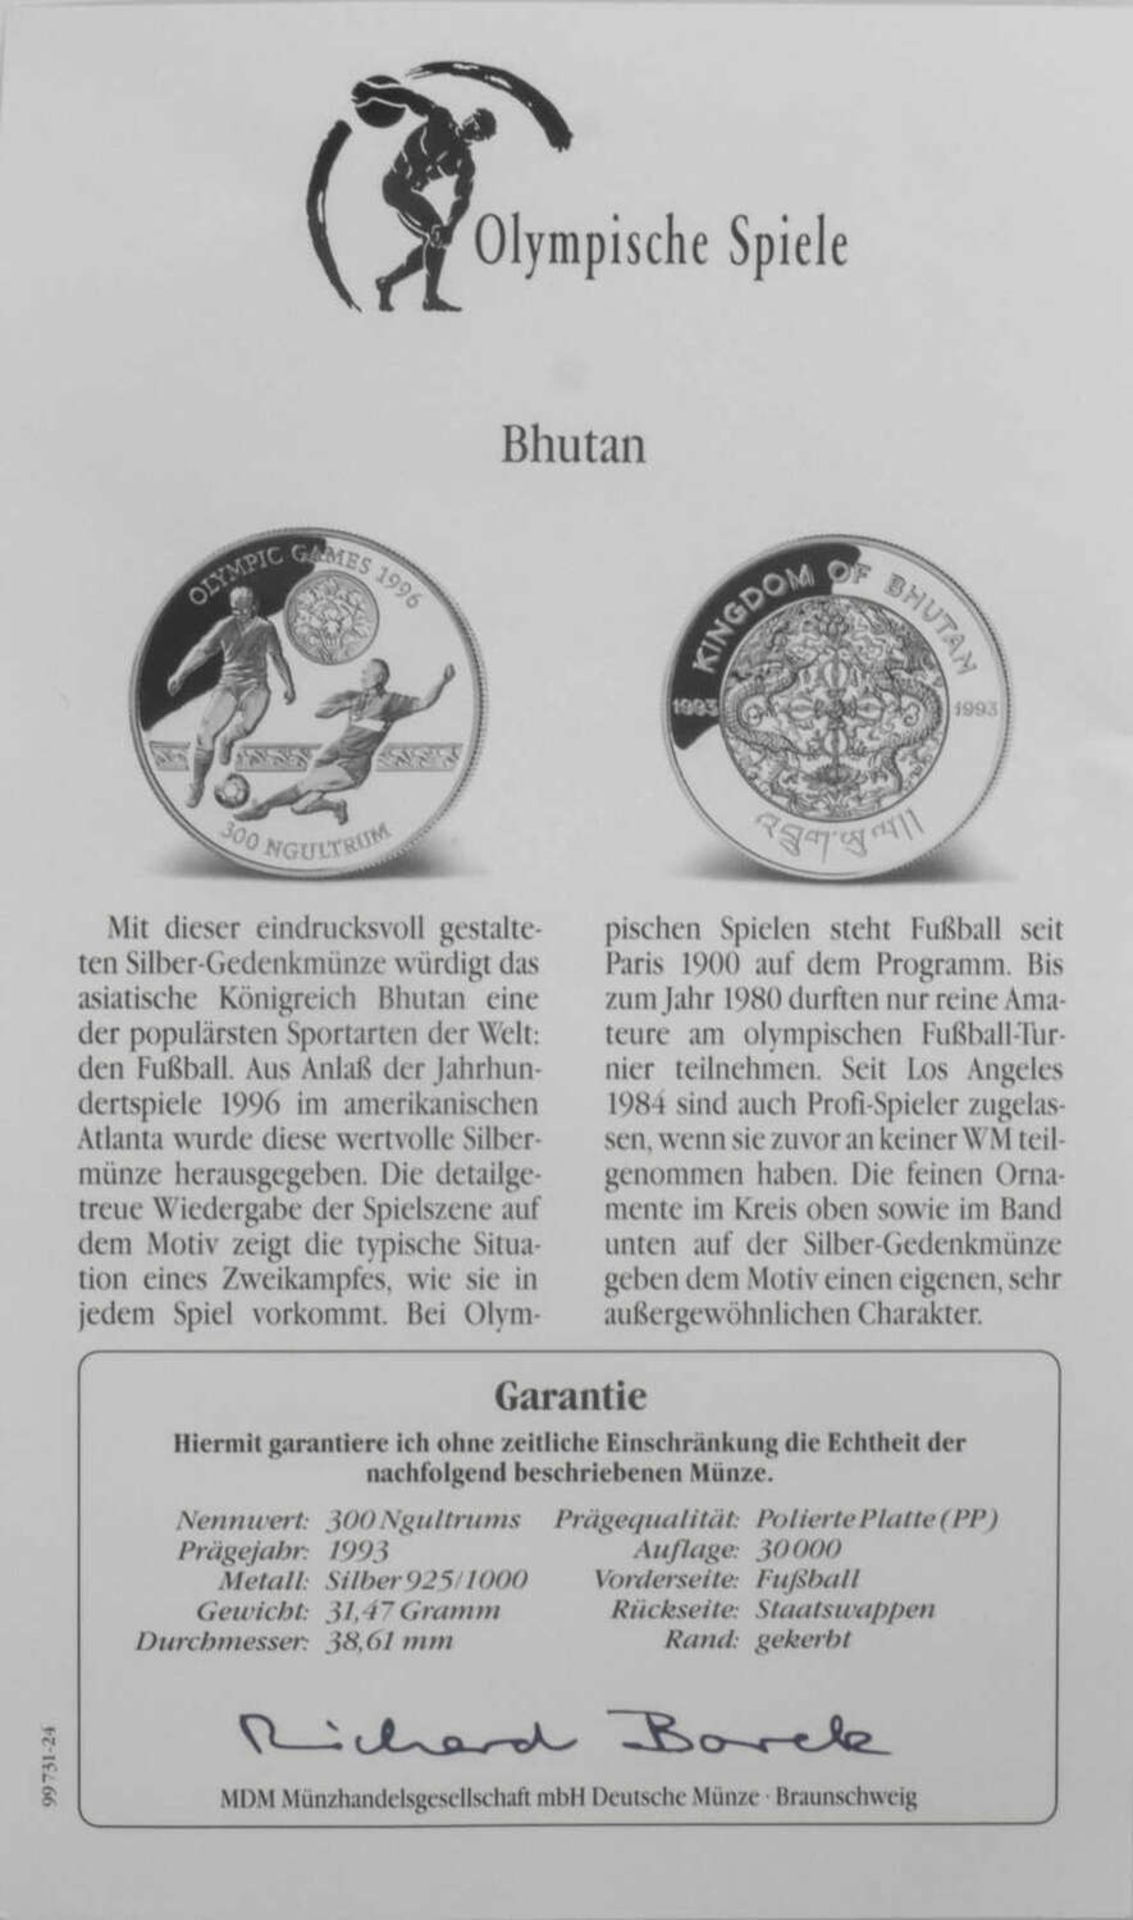 Olympische Spiele Bhutan, 300 Ngultrums, 925/1000 Silber. Fußball. Mit Zertifikat.Olympic Games Bh - Image 3 of 3